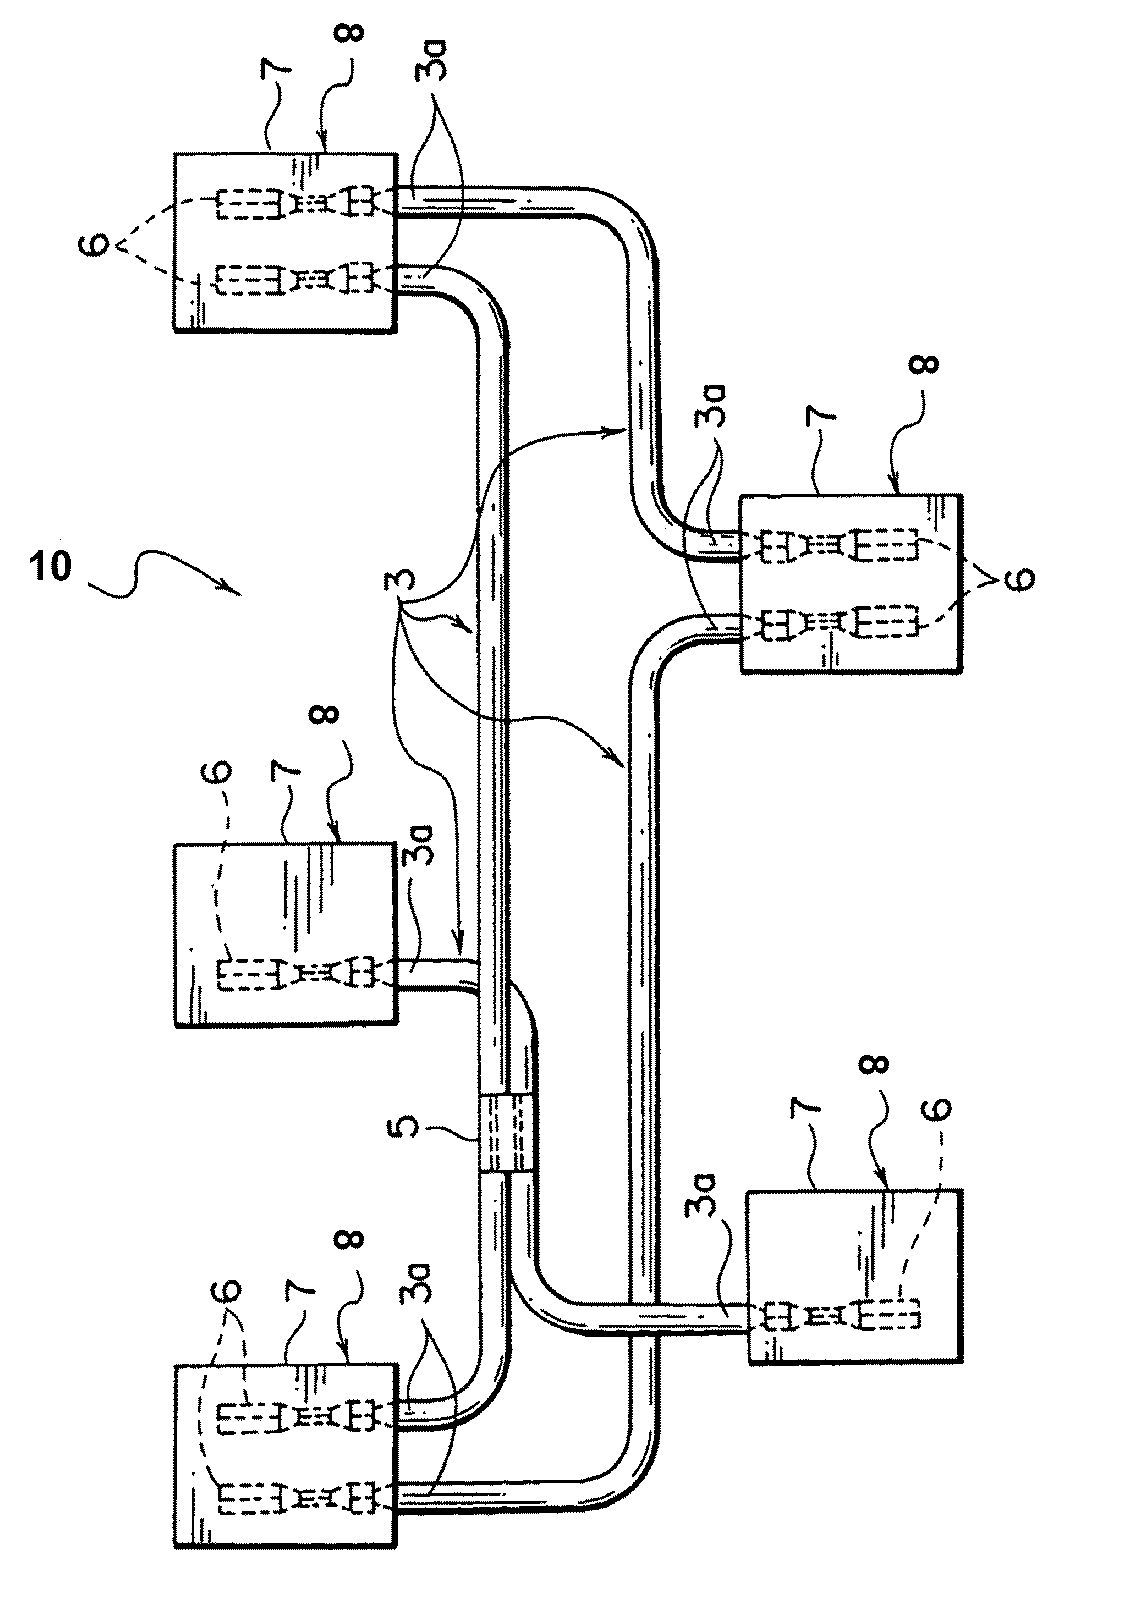 Insulated non-halogenated covered aluminum conductor and wire harness assembly